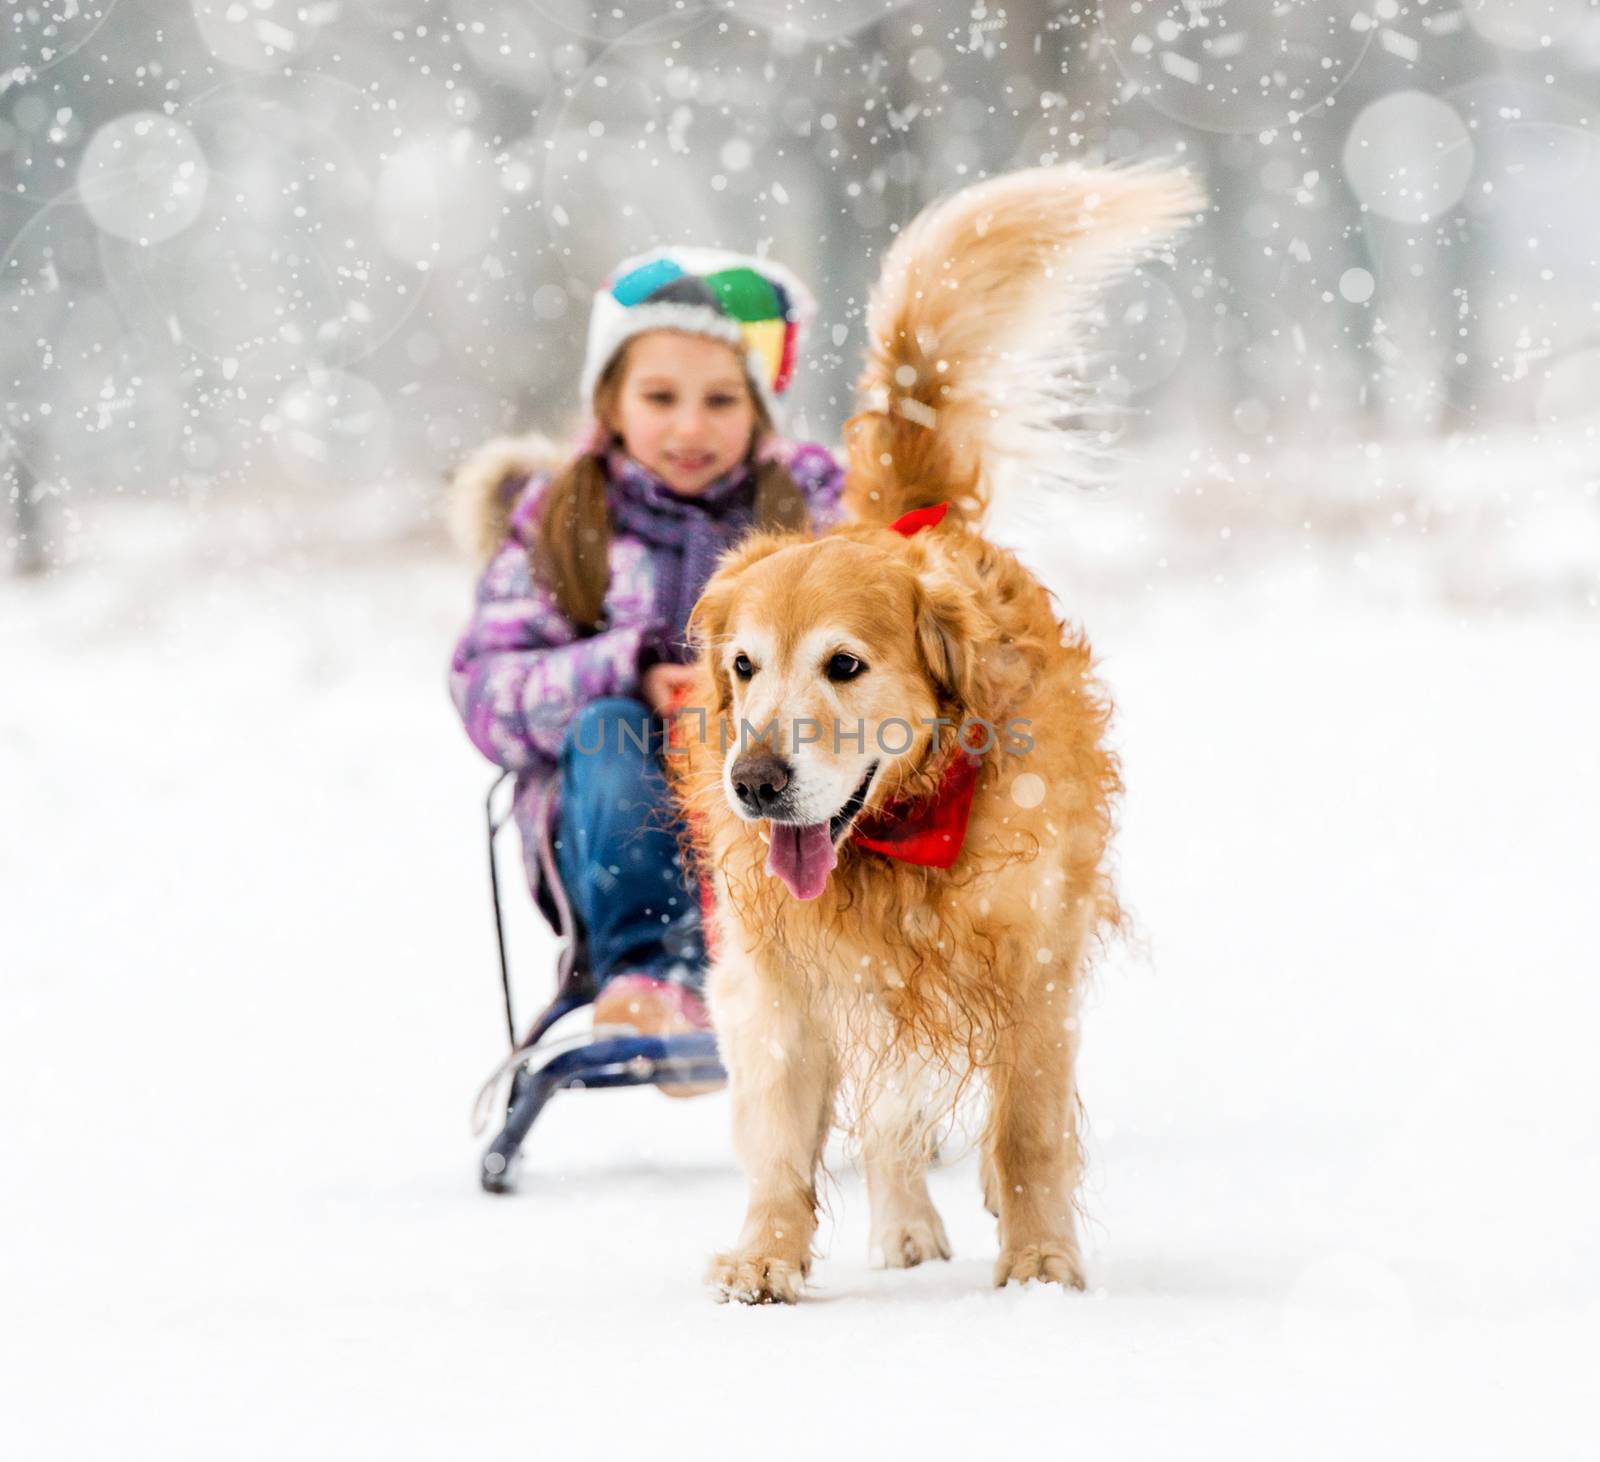 Furry Golden Retriever pulls the sledge with a little girl in the snow